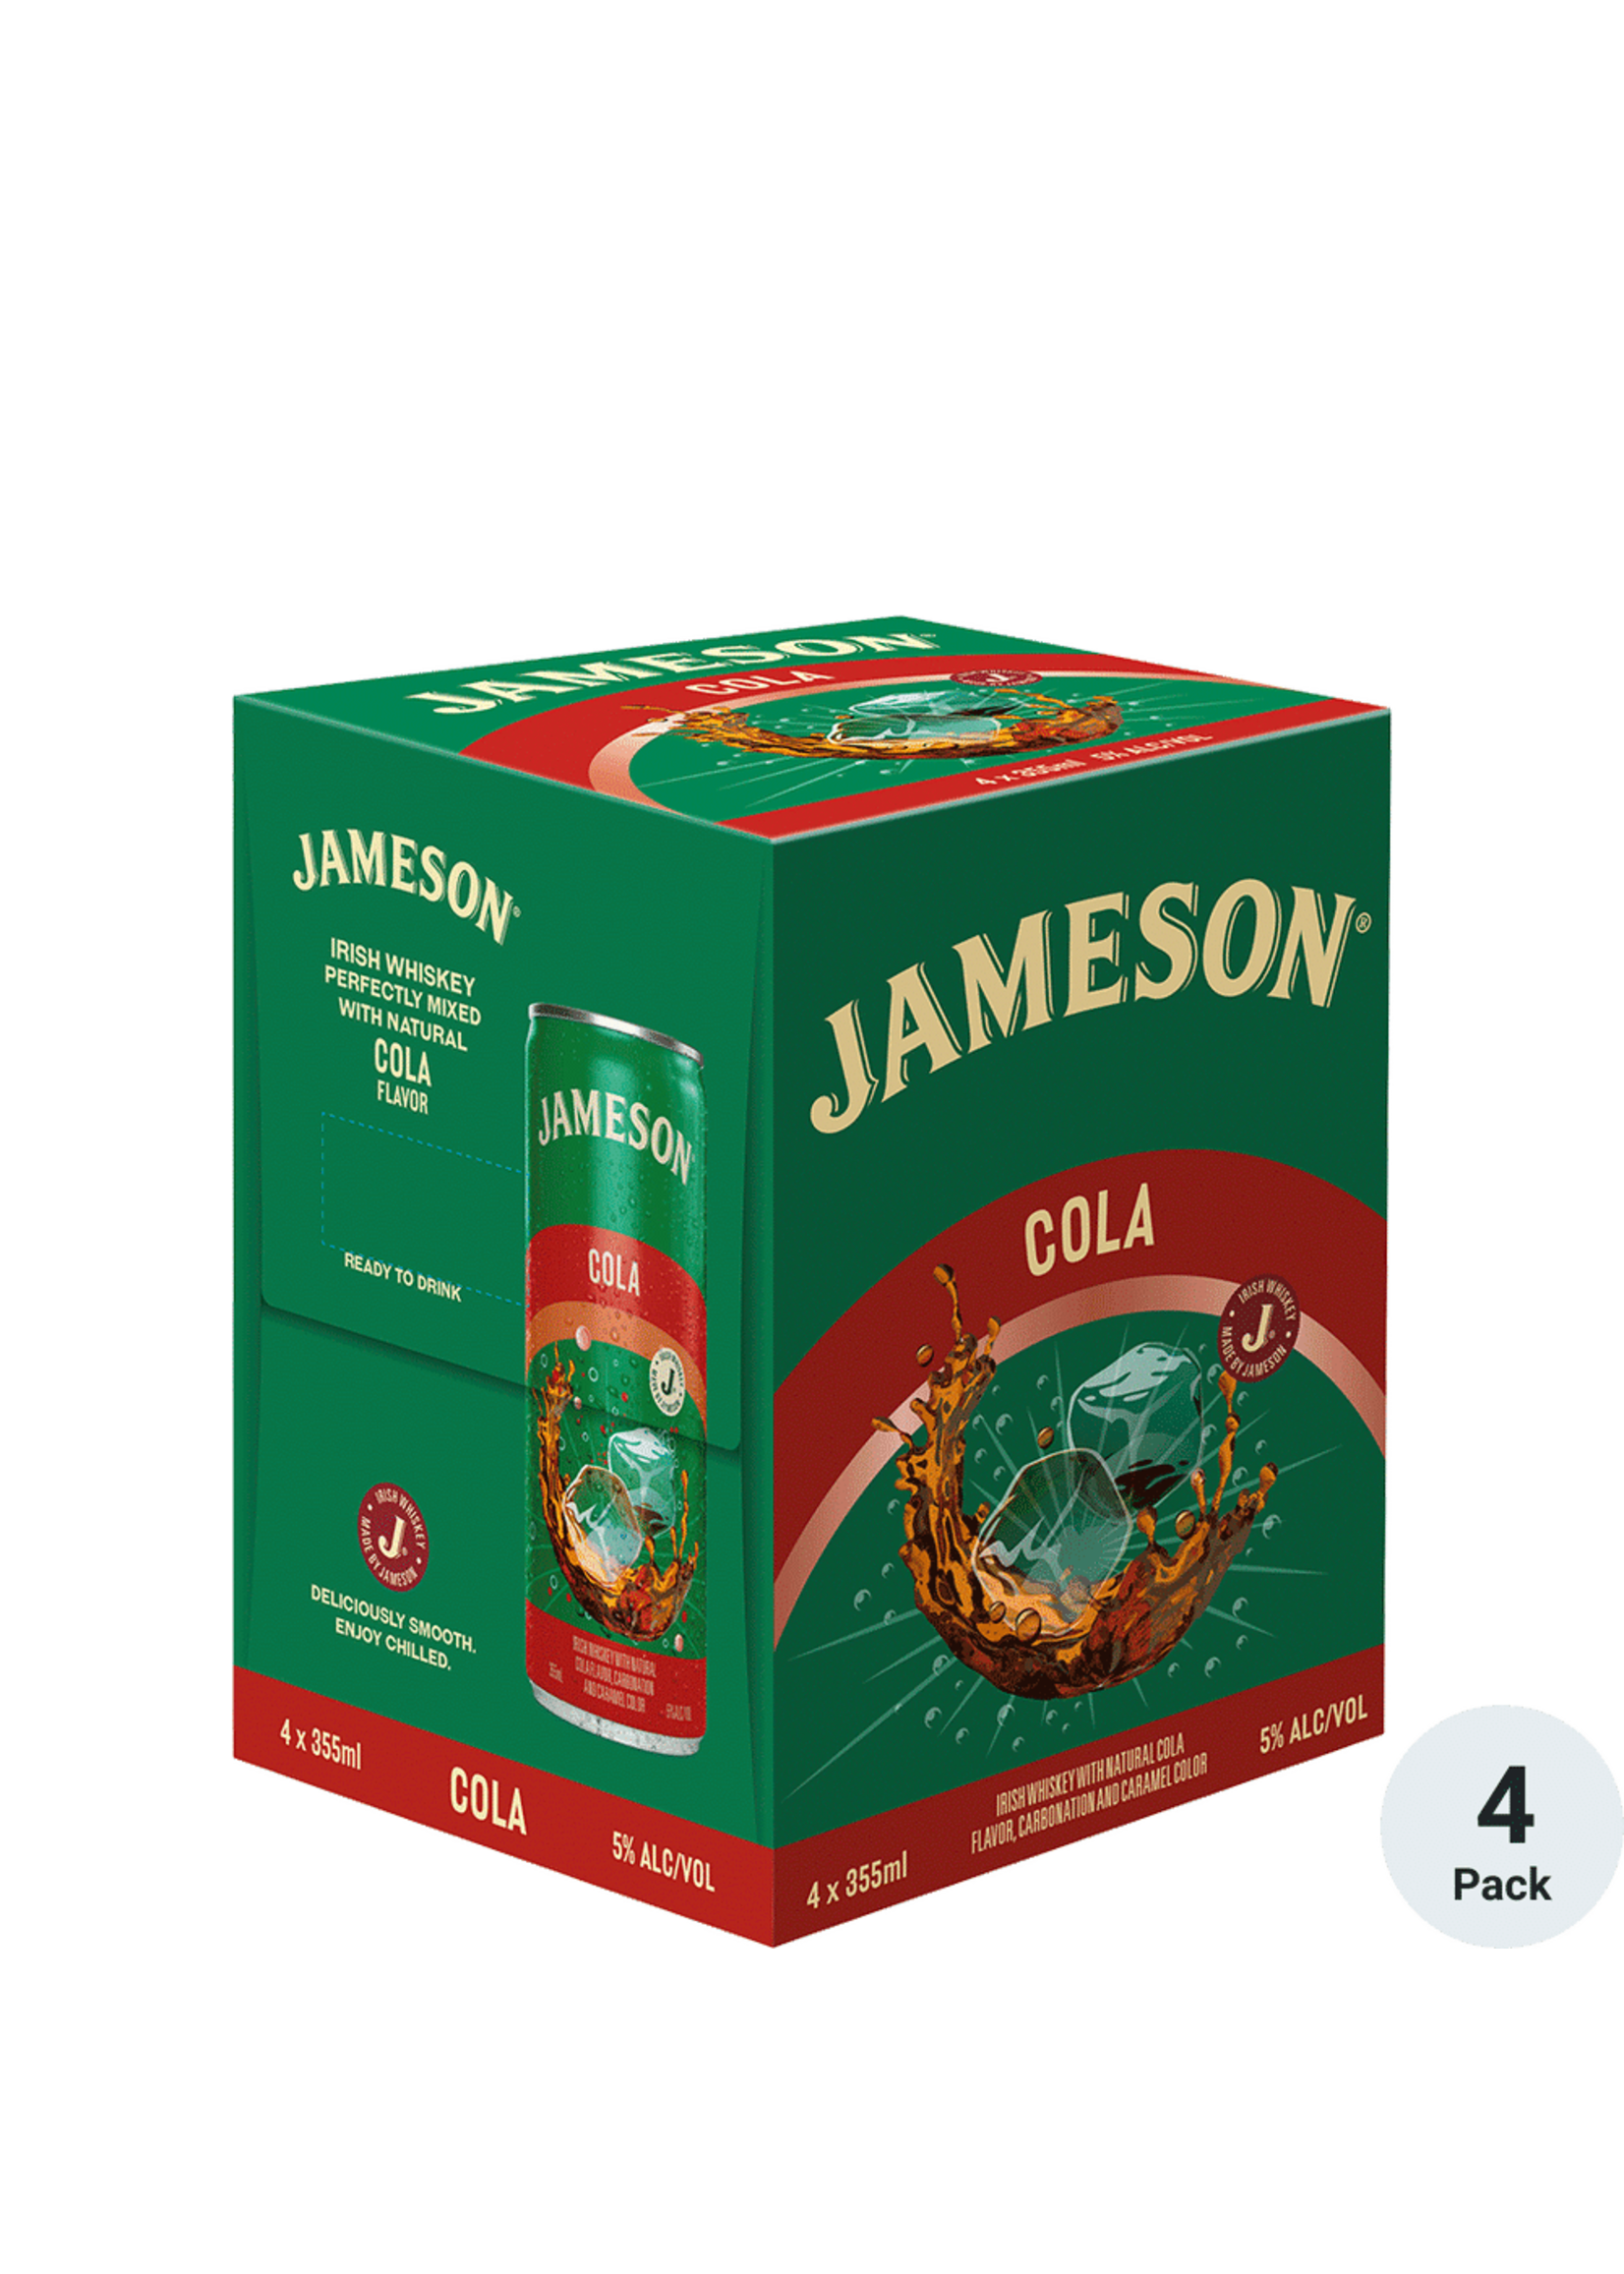 Jameson RTD Whiskey & Cola Cocktail 10Proof 4pk 12oz Cans